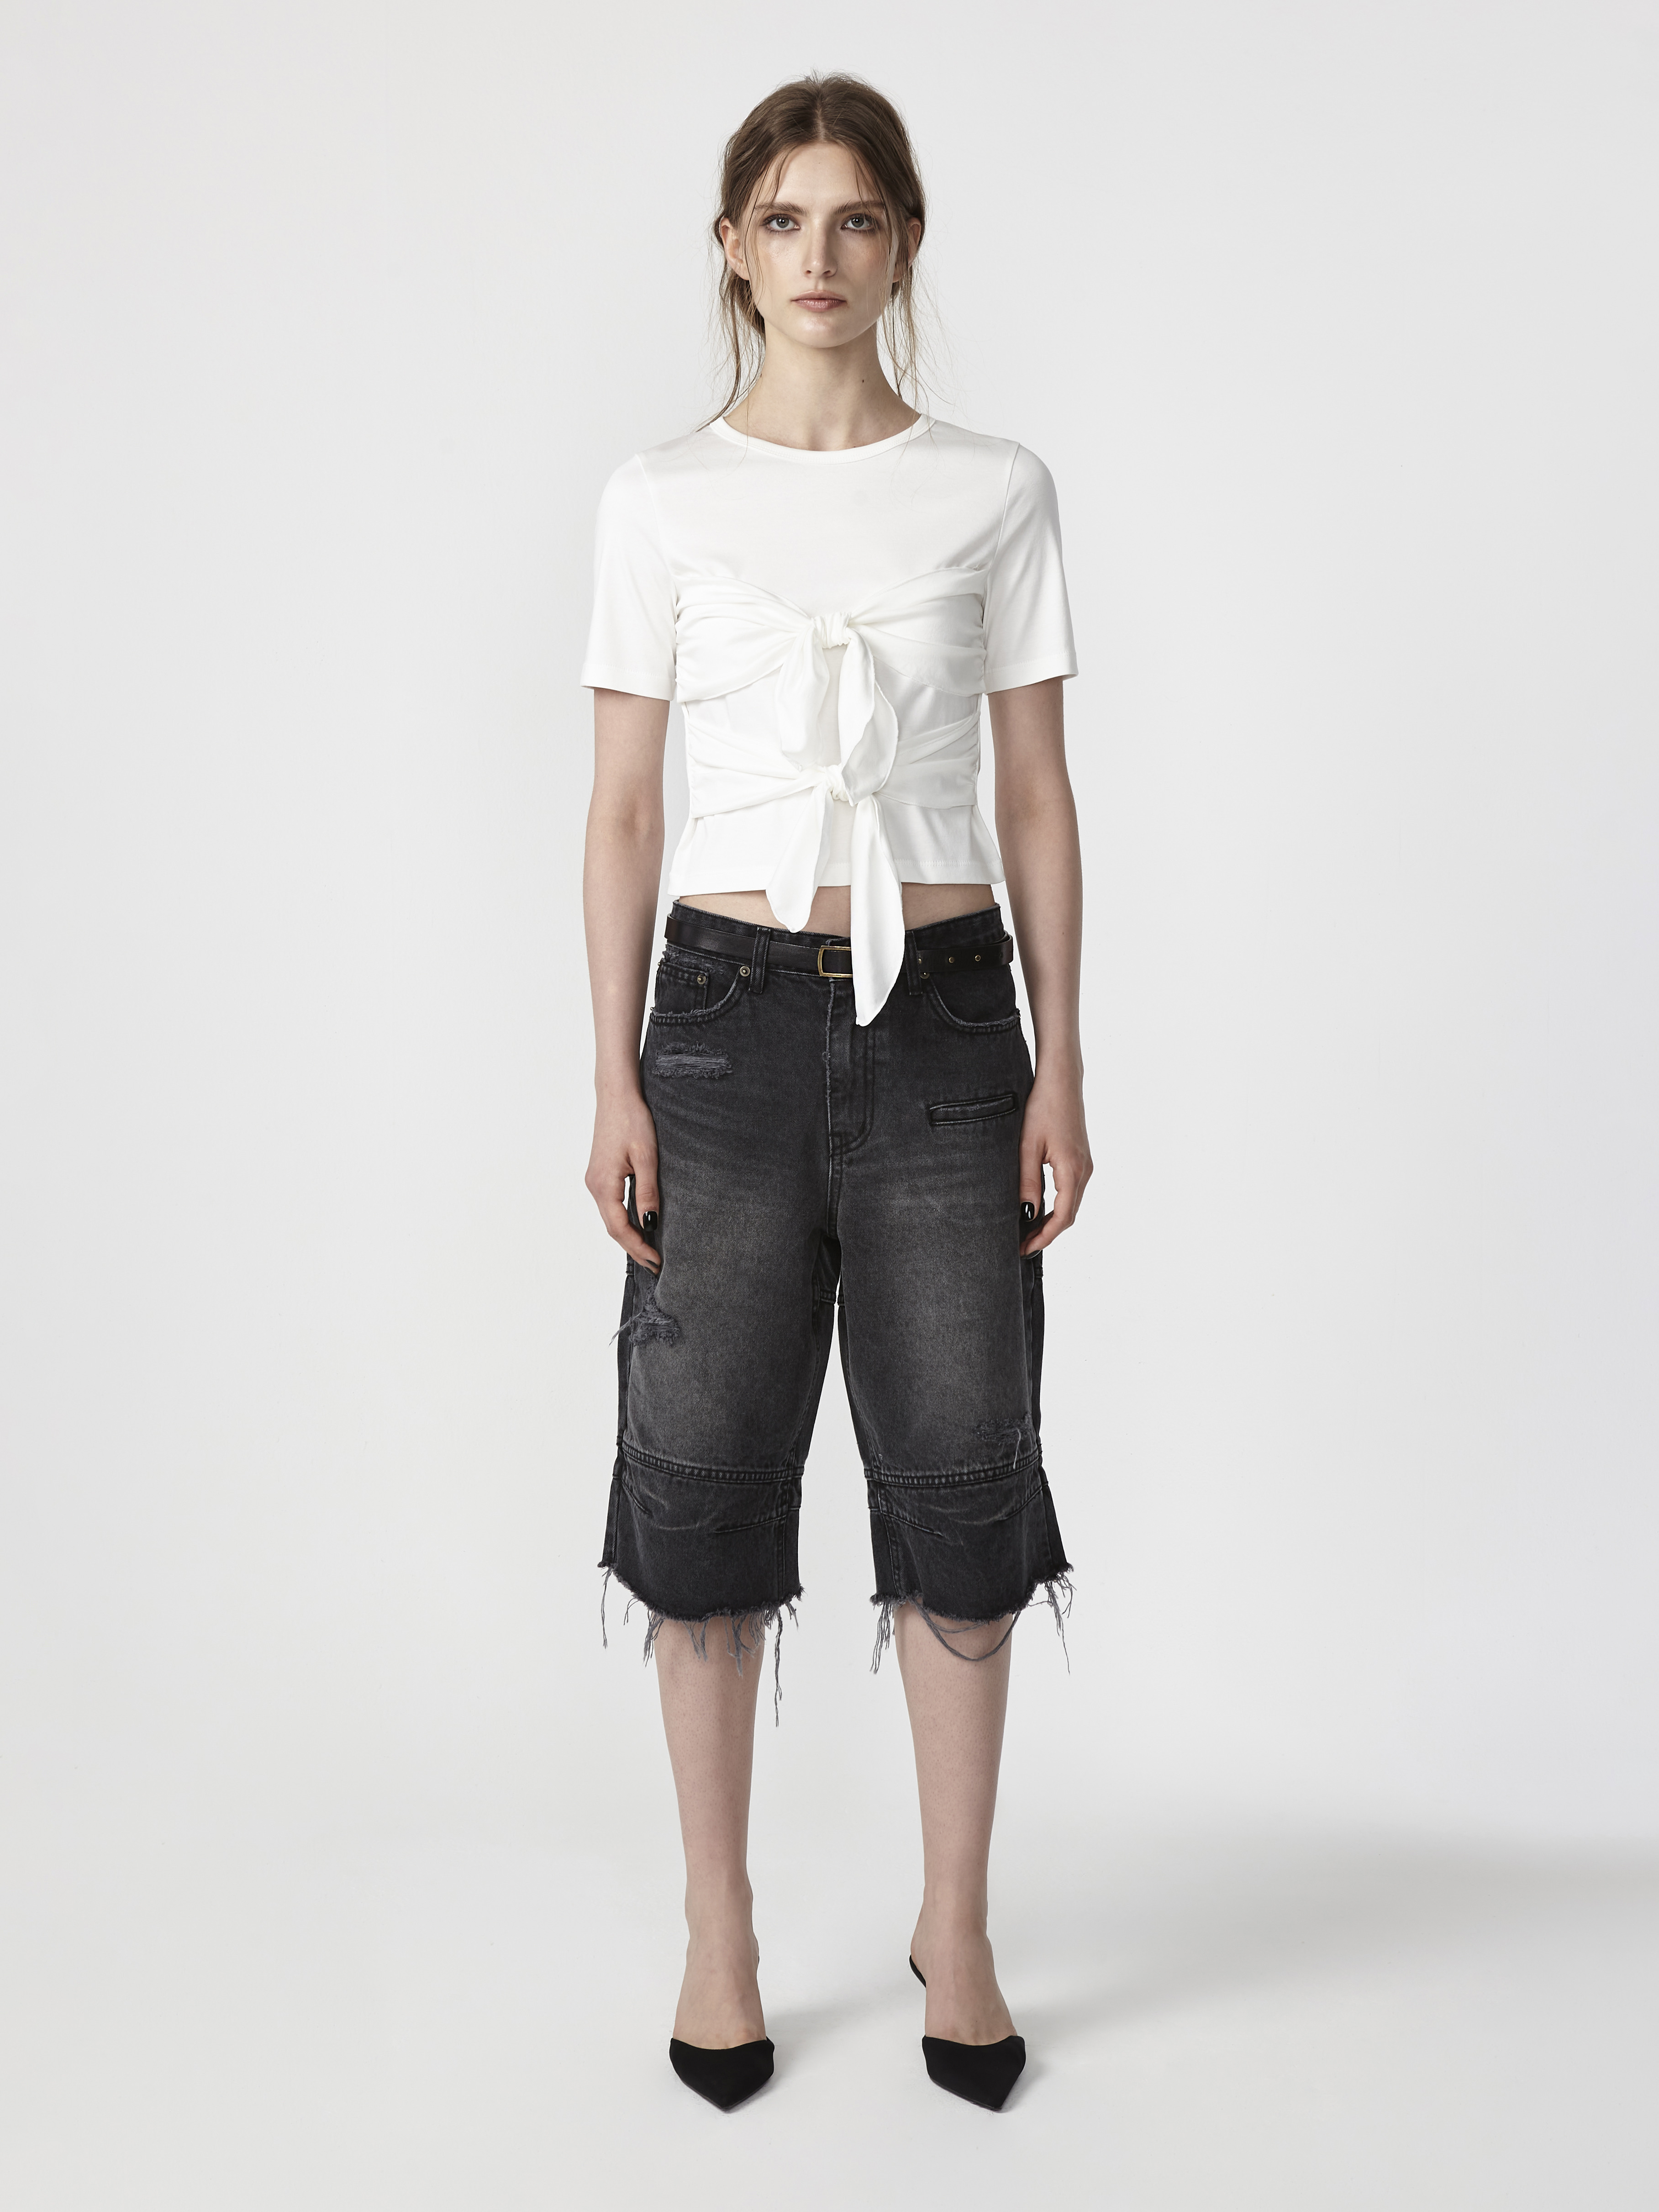 Knotted Slim T-Shirt - White